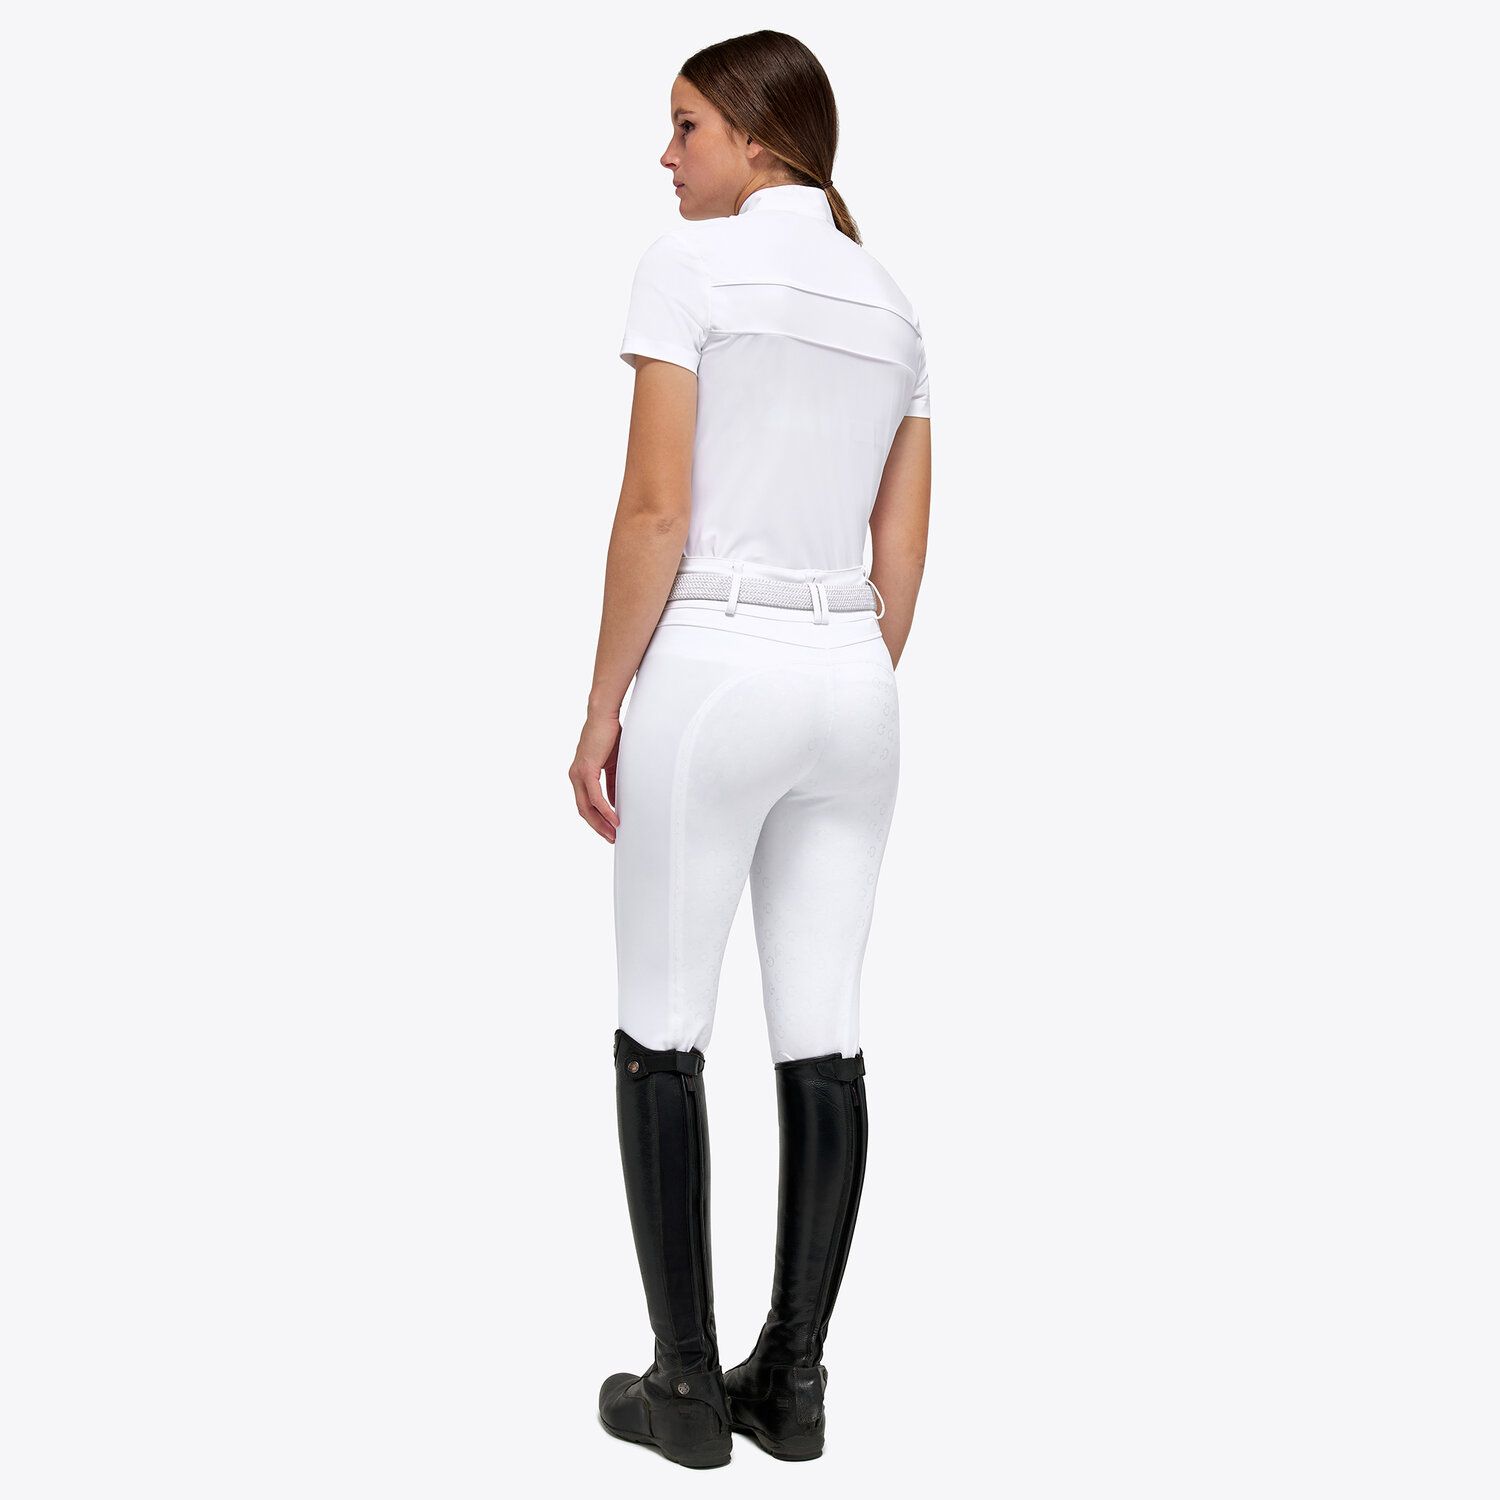 Cavalleria Toscana Women’s performance jersey show shirt with a zip WHITE-3